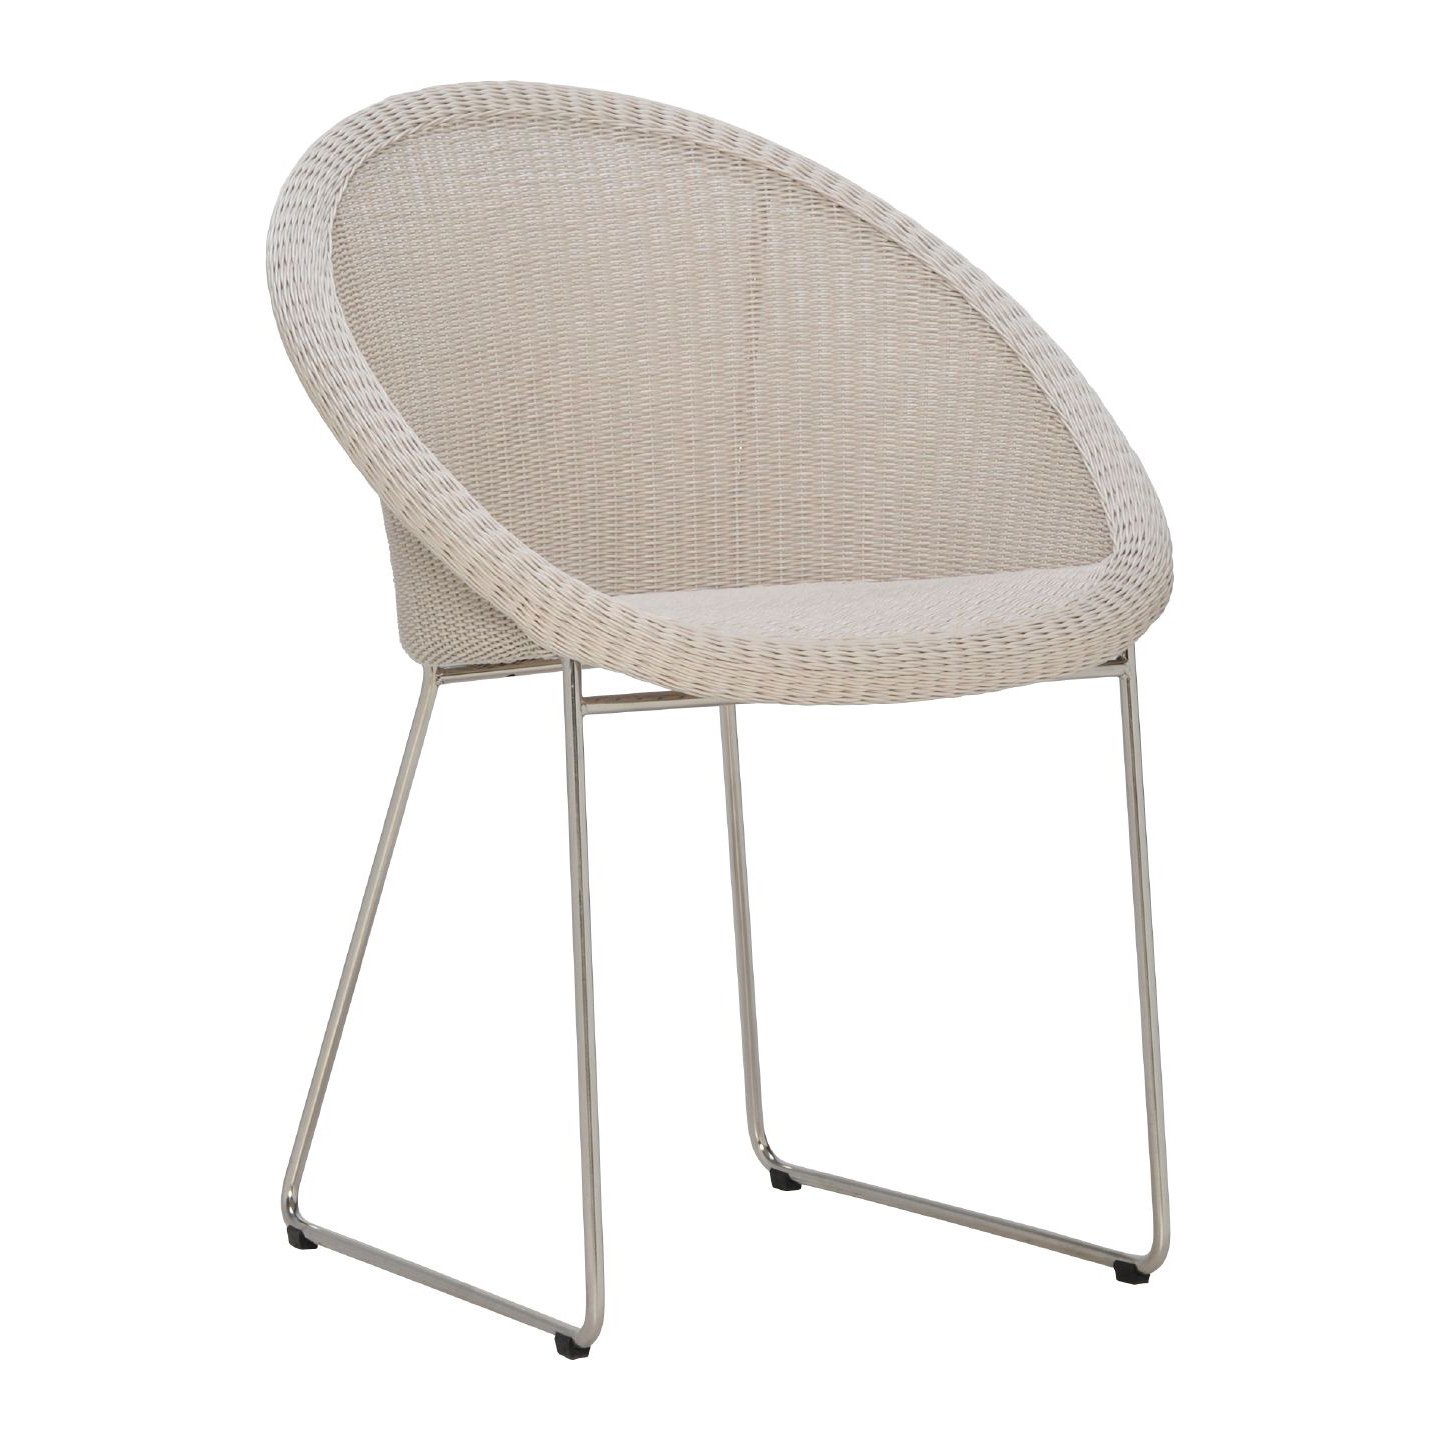 Haworth Gigi II lounge chair in off white color with metal legs